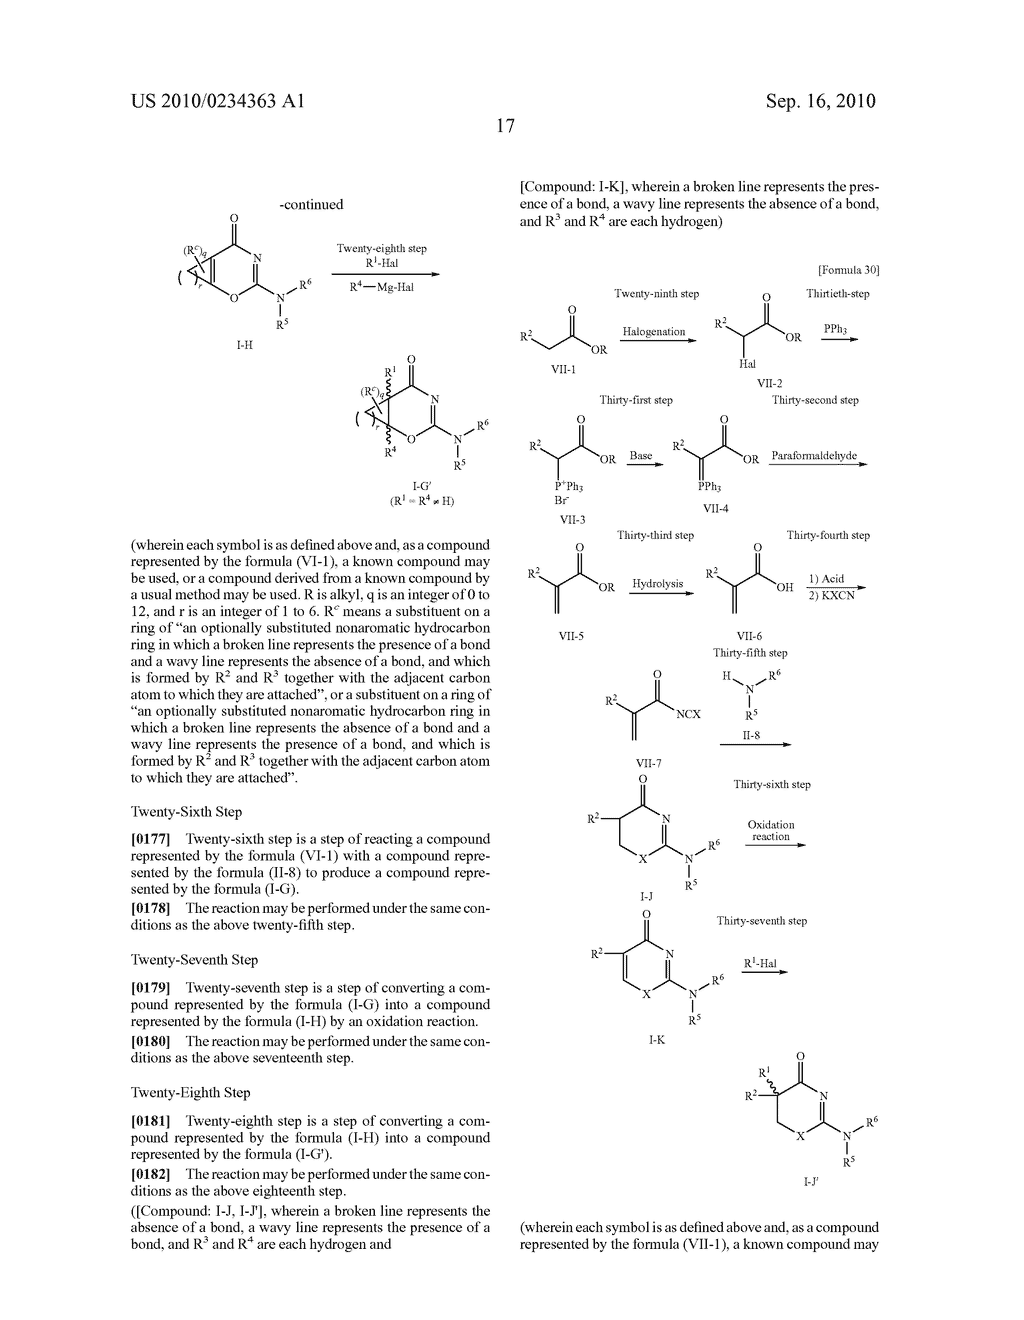 HETEROCYCLIC DERIVATIVE HAVING INHIBITORY ACTIVITY ON TYPE-I 11 DATA-HYDROXYSTEROID DEHYDROGENASE - diagram, schematic, and image 18